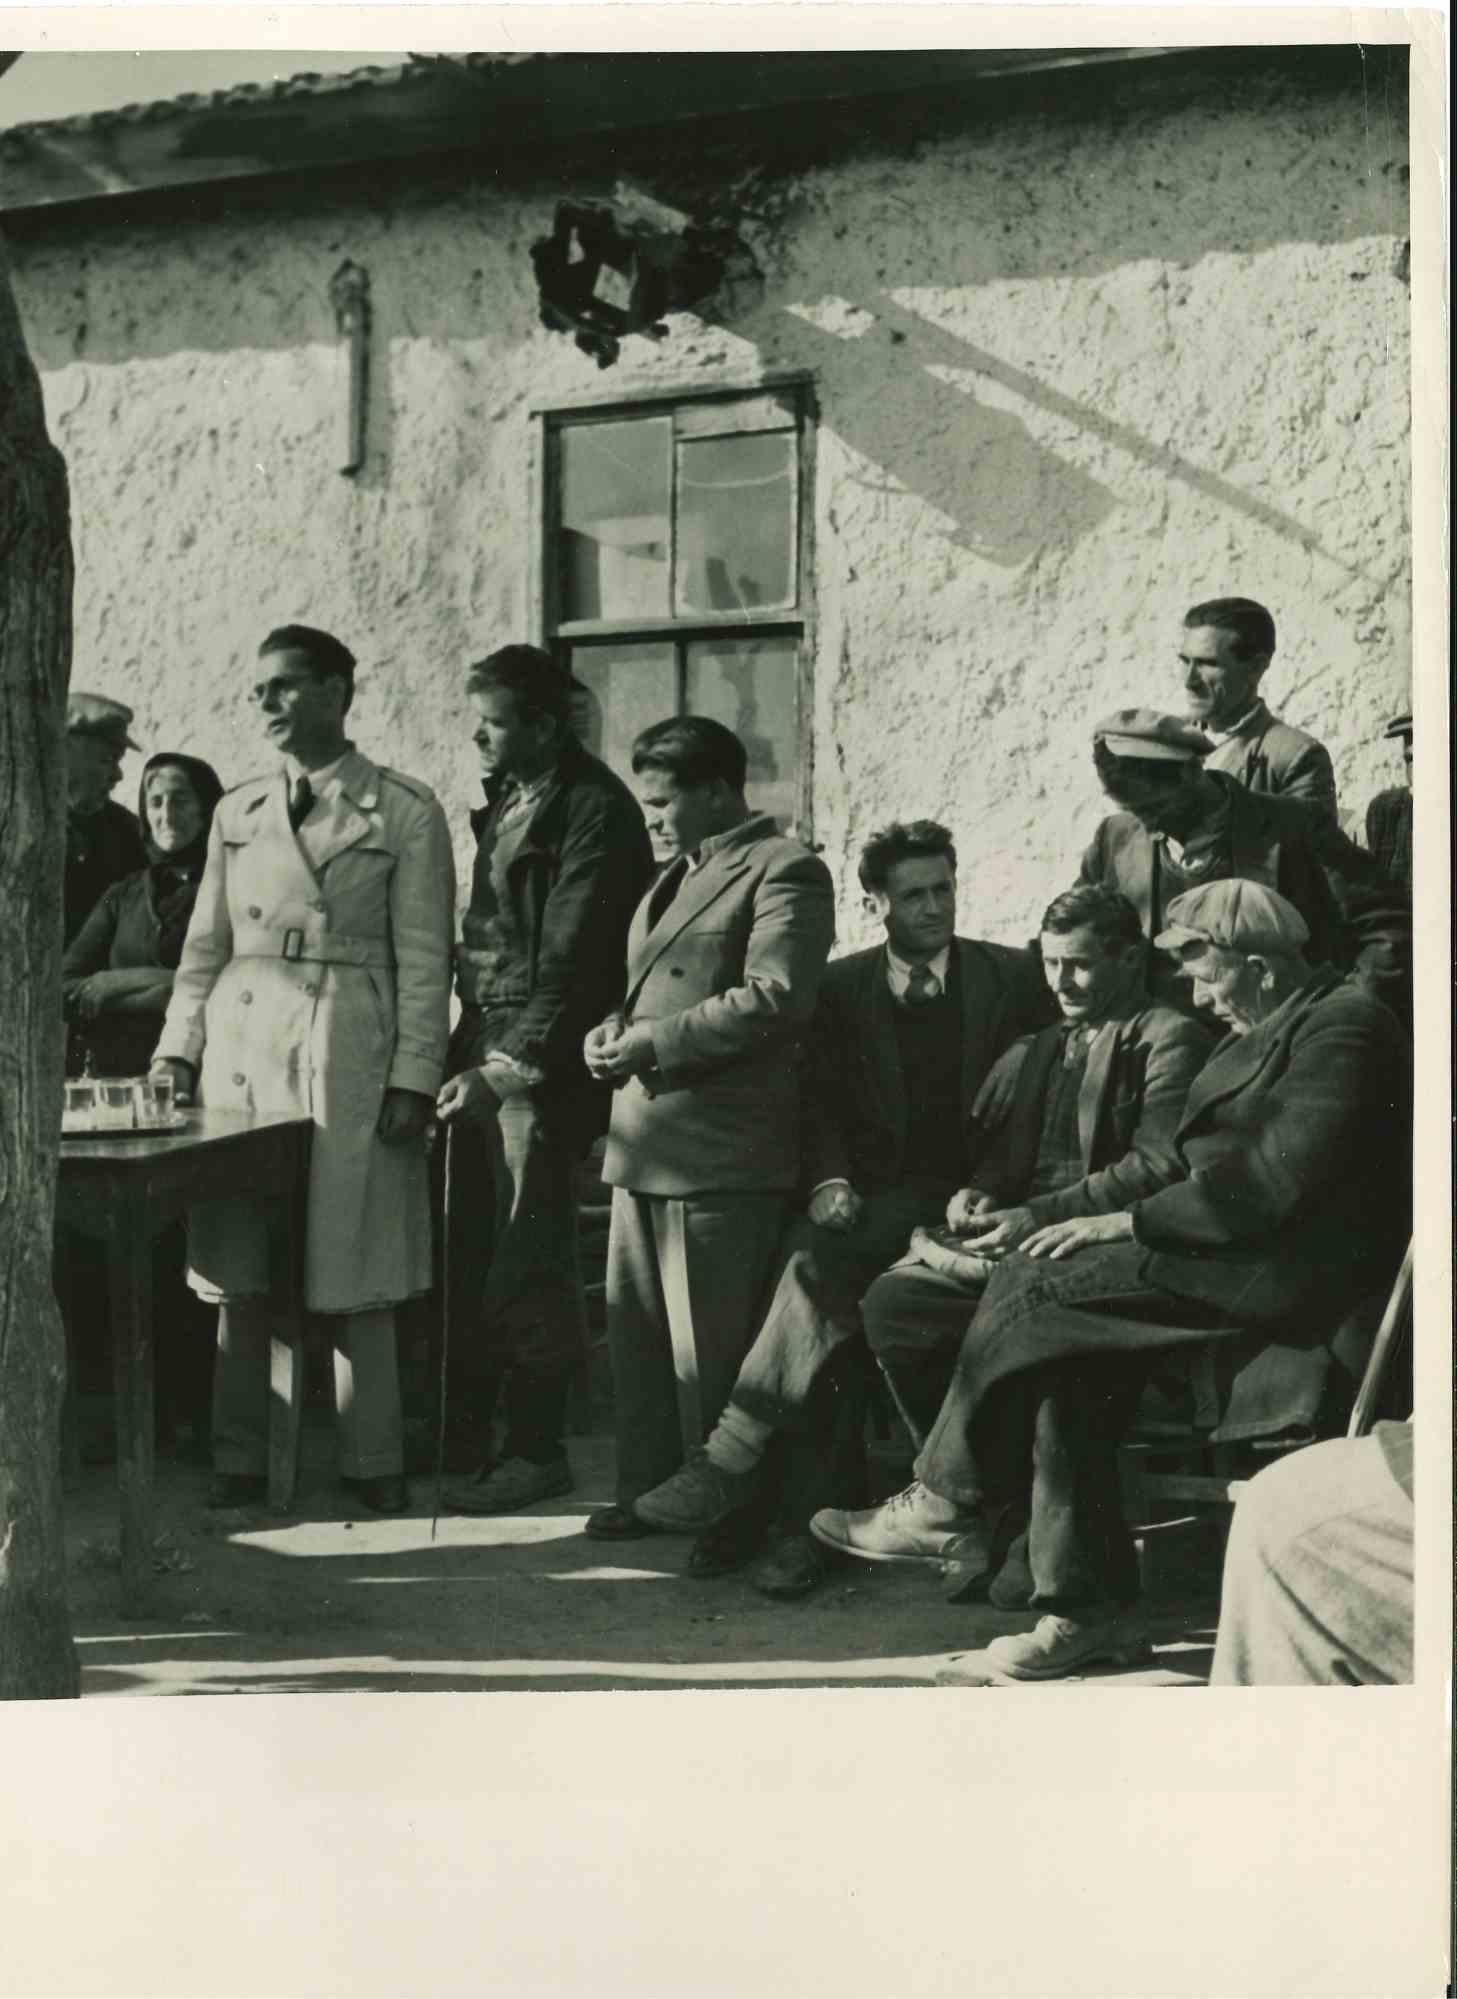 Unknown Figurative Photograph - Rural Greece Moving to Progress - Vintage Photograph - Mid 20th Century